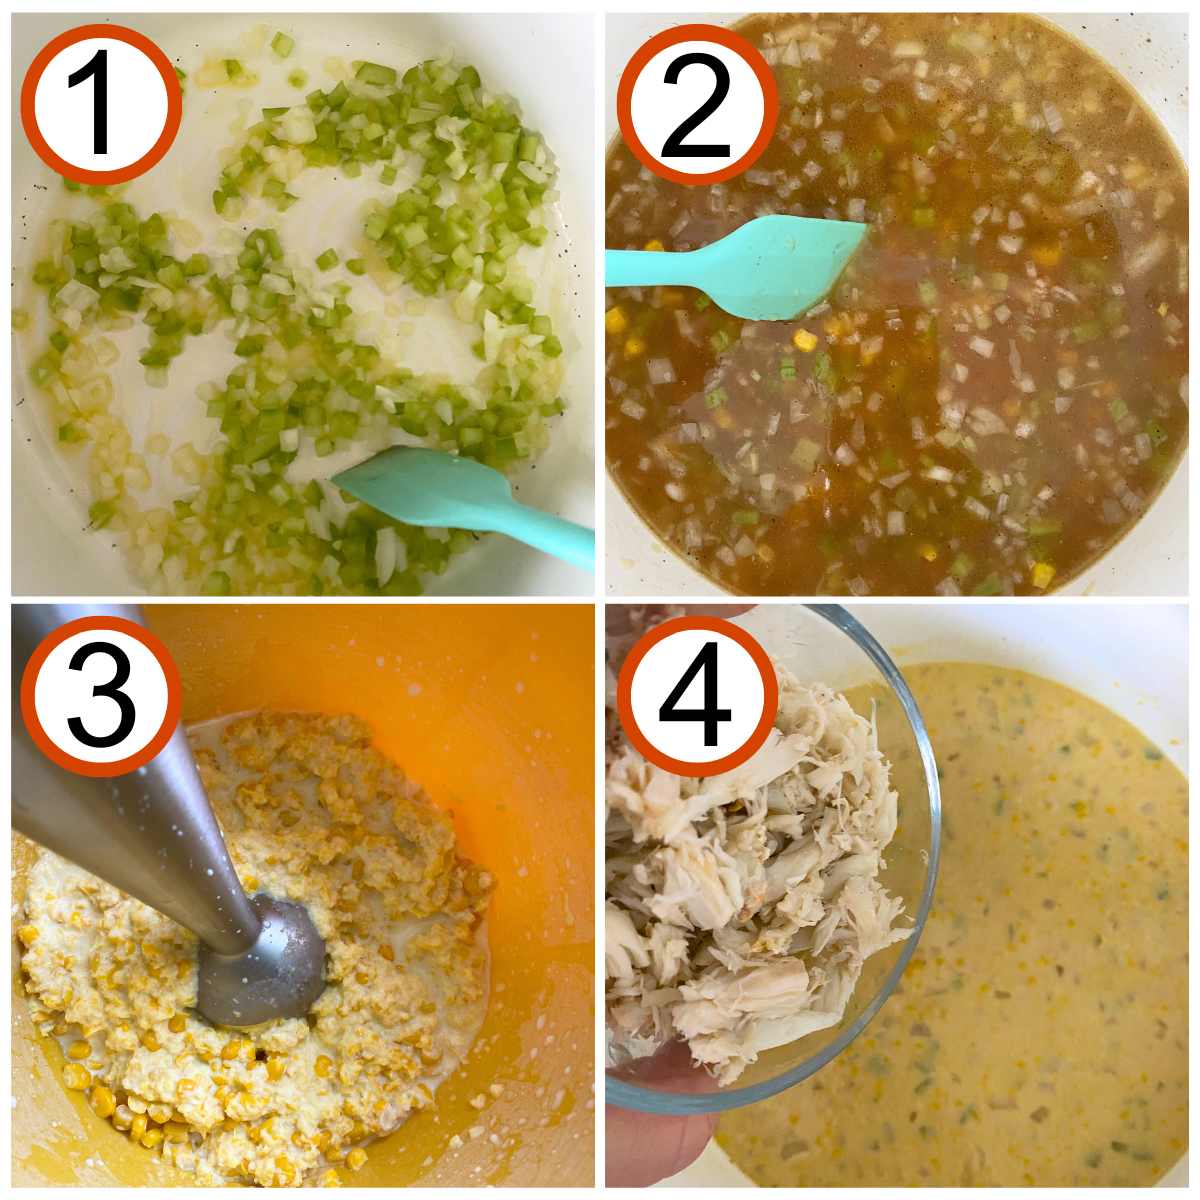 Collage of pictures to make corn crab soup recipe: 1) sauteeing onion and celery, 2) broth, corn, and spices added to pot, 3) corn and milk being pureed with an immersion blender, 4) crab meat being added to the pot.